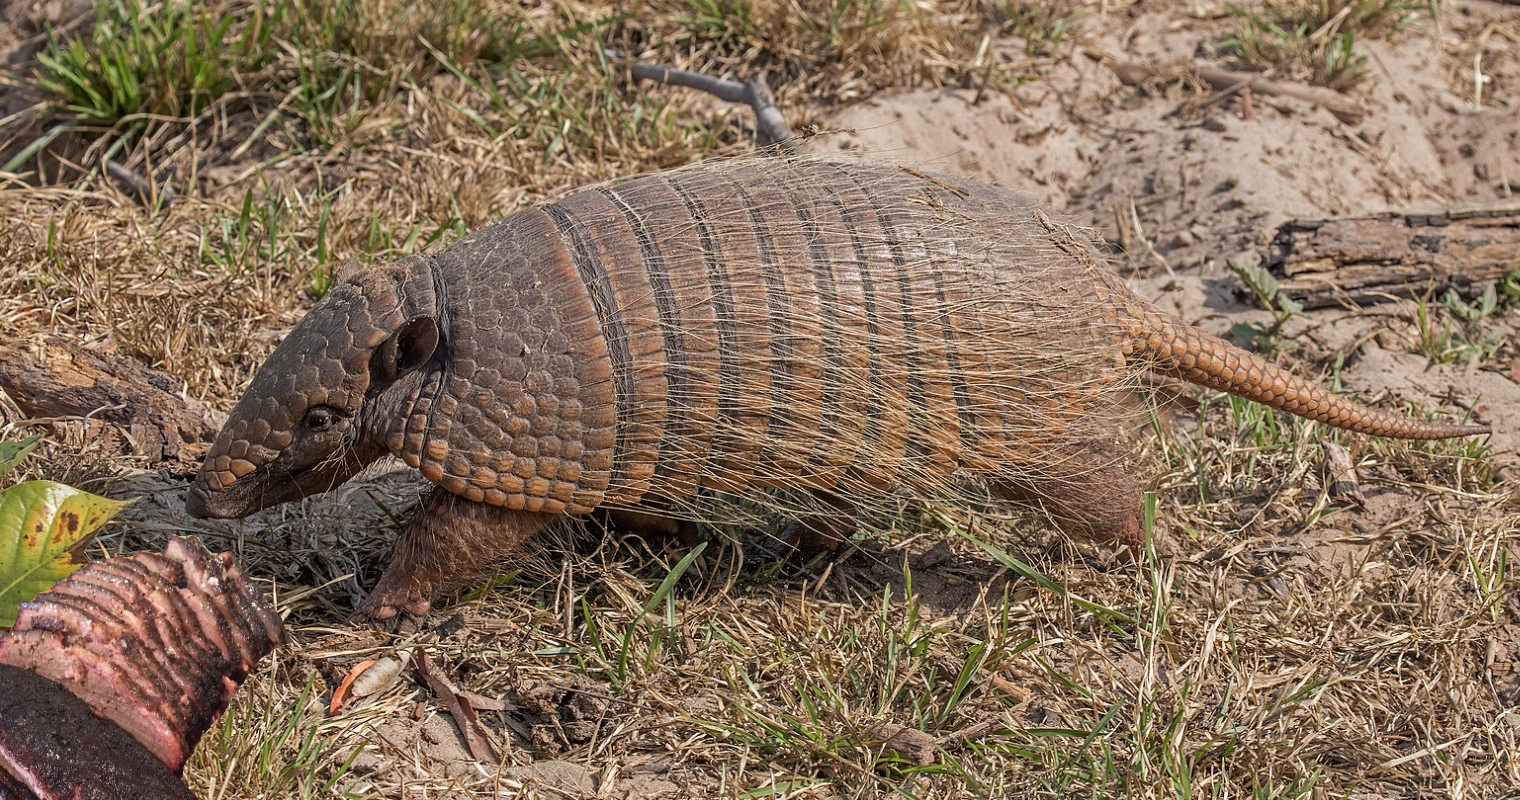 Armadillo eating natural diet of brisket from Rudy’s